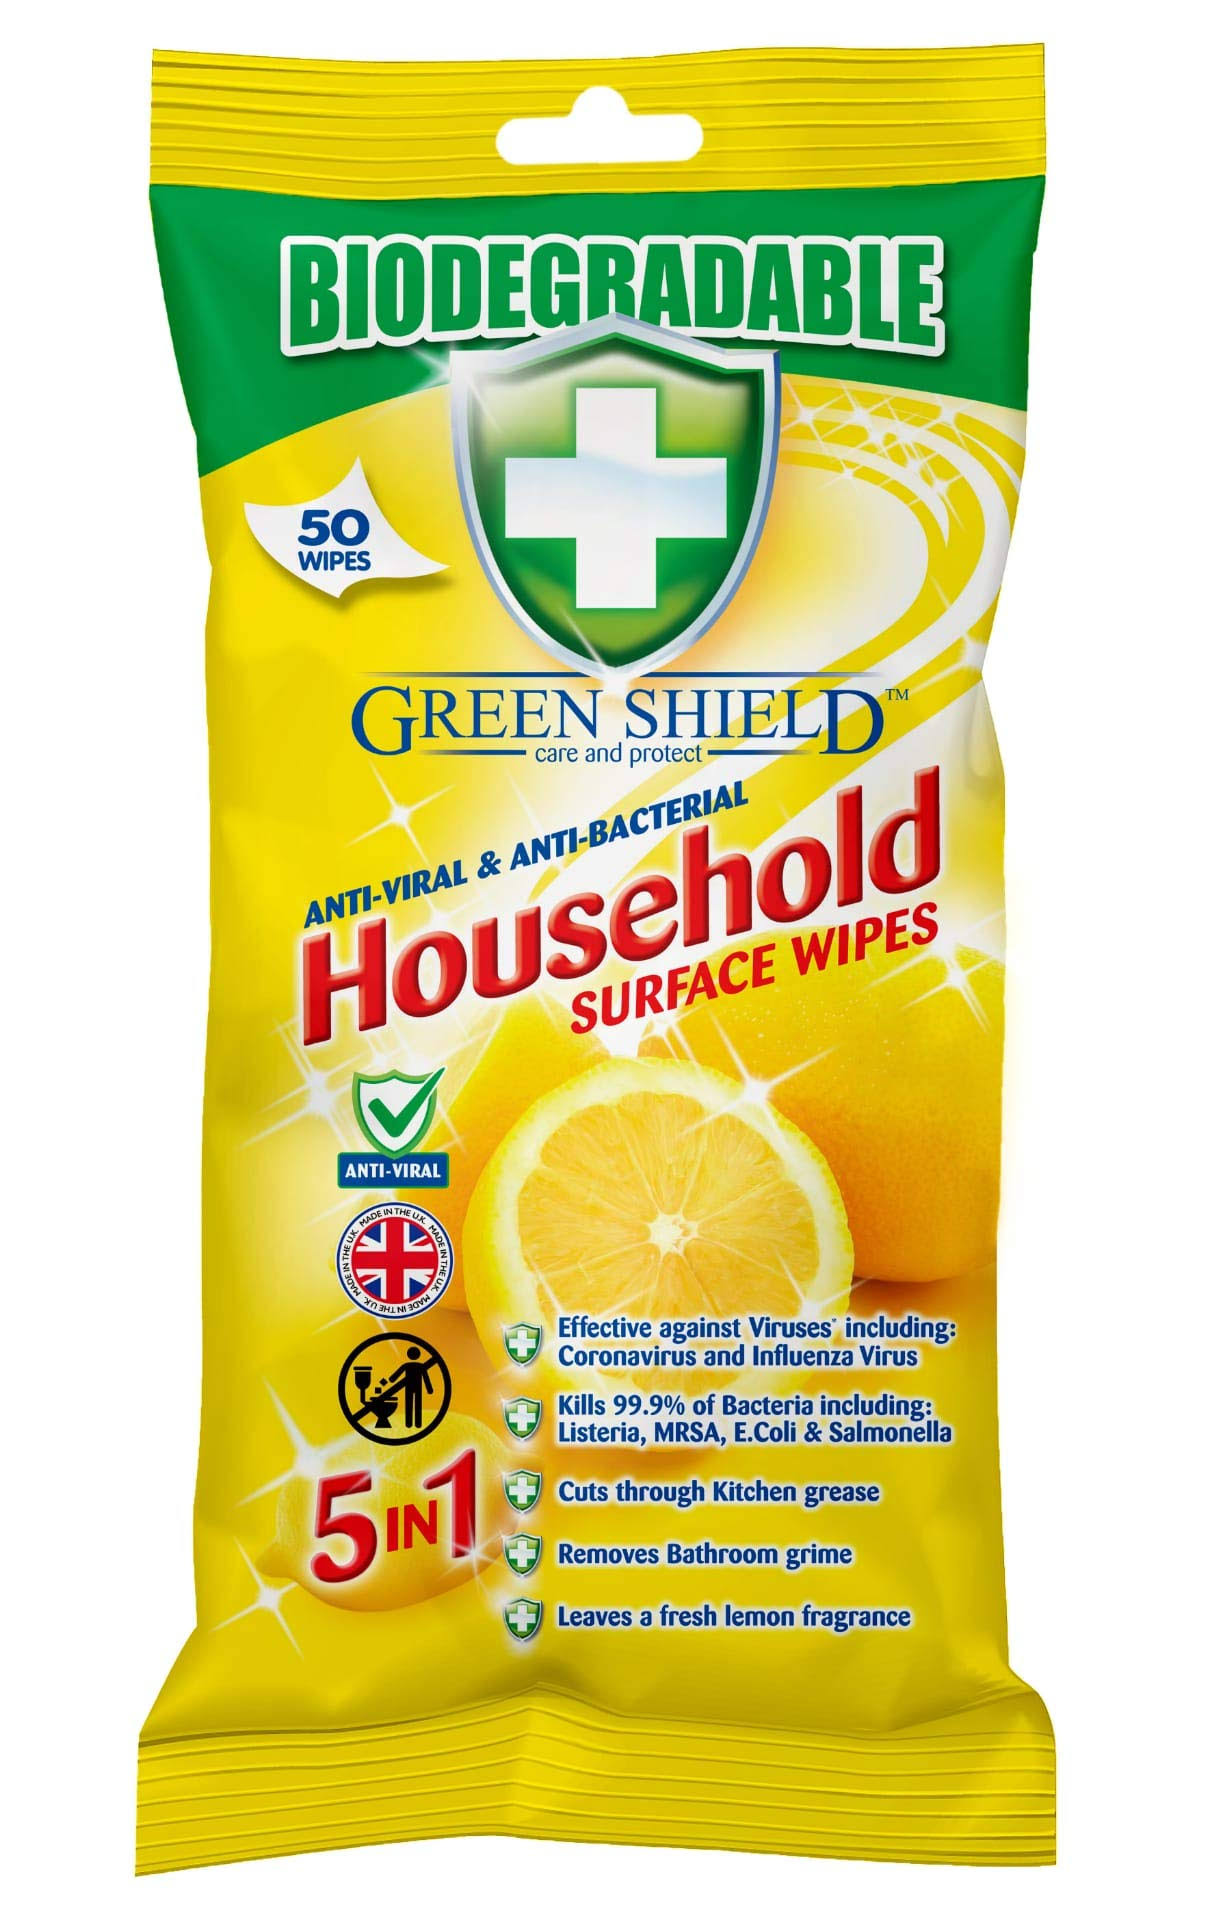 Green Shield Anti-Viral Anti-Bac Household Surface Wipes Pack of 50 Wipes